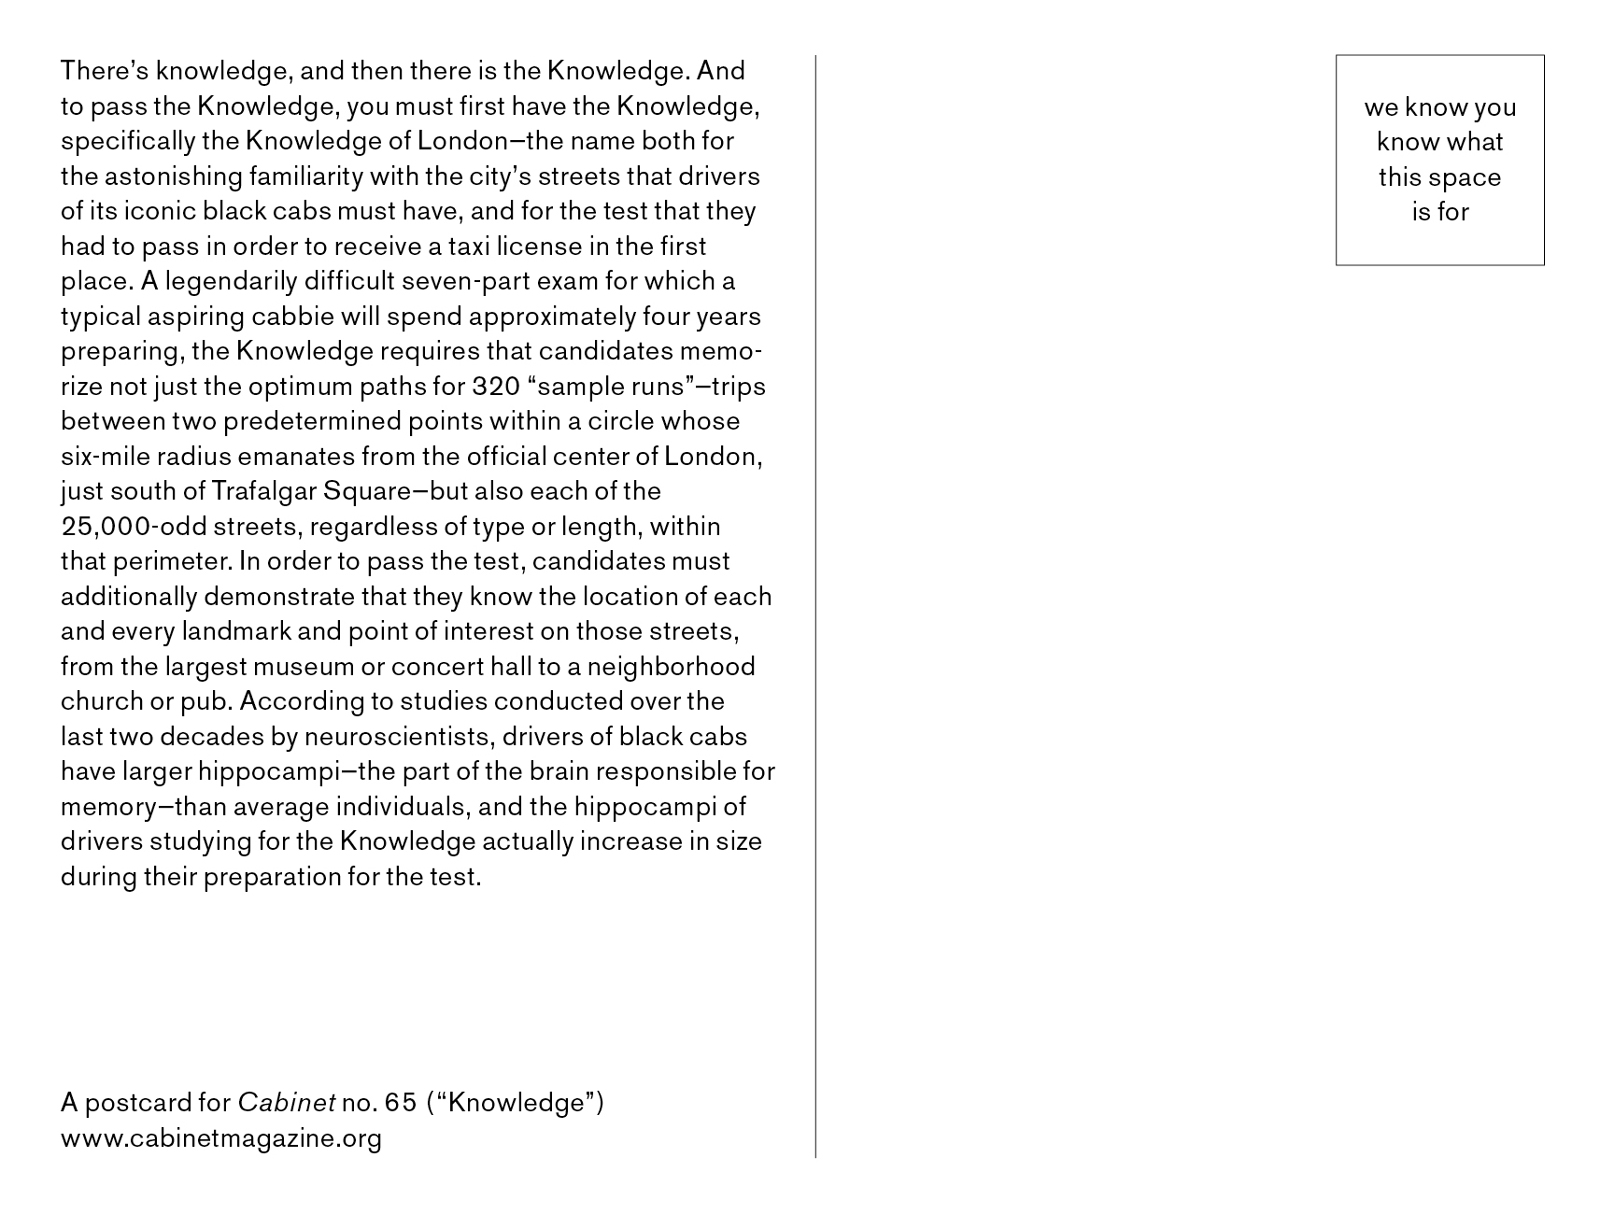 The back of a postcard. Text explains the history of the Knowledge of London, the test administered to cab driver candidates in order to receive a taxi license. A legendarily difficult seven-part exam for which a typical aspiring cabbie will spend approximately four years preparing, the Knowledge requires that candidates memorize not just the optimum paths for three hundred twenty ‘sample runs’–trips between two predetermined points within a circle whose six-mile radius emanates from the official center of London, just south of Trafalgar Square–but also each of the twenty five thousand or so streets within that perimeter. They must demonstrate that they know the location of every point of interest on those streets. According to studies conducted over the last two decades by neuroscientists, drivers of black cabs have larger hippocampi–the part of the brain responsible for memory–than average individuals, and the hippocampi of drivers studying for their Knowledge actually increase in size during test prep.